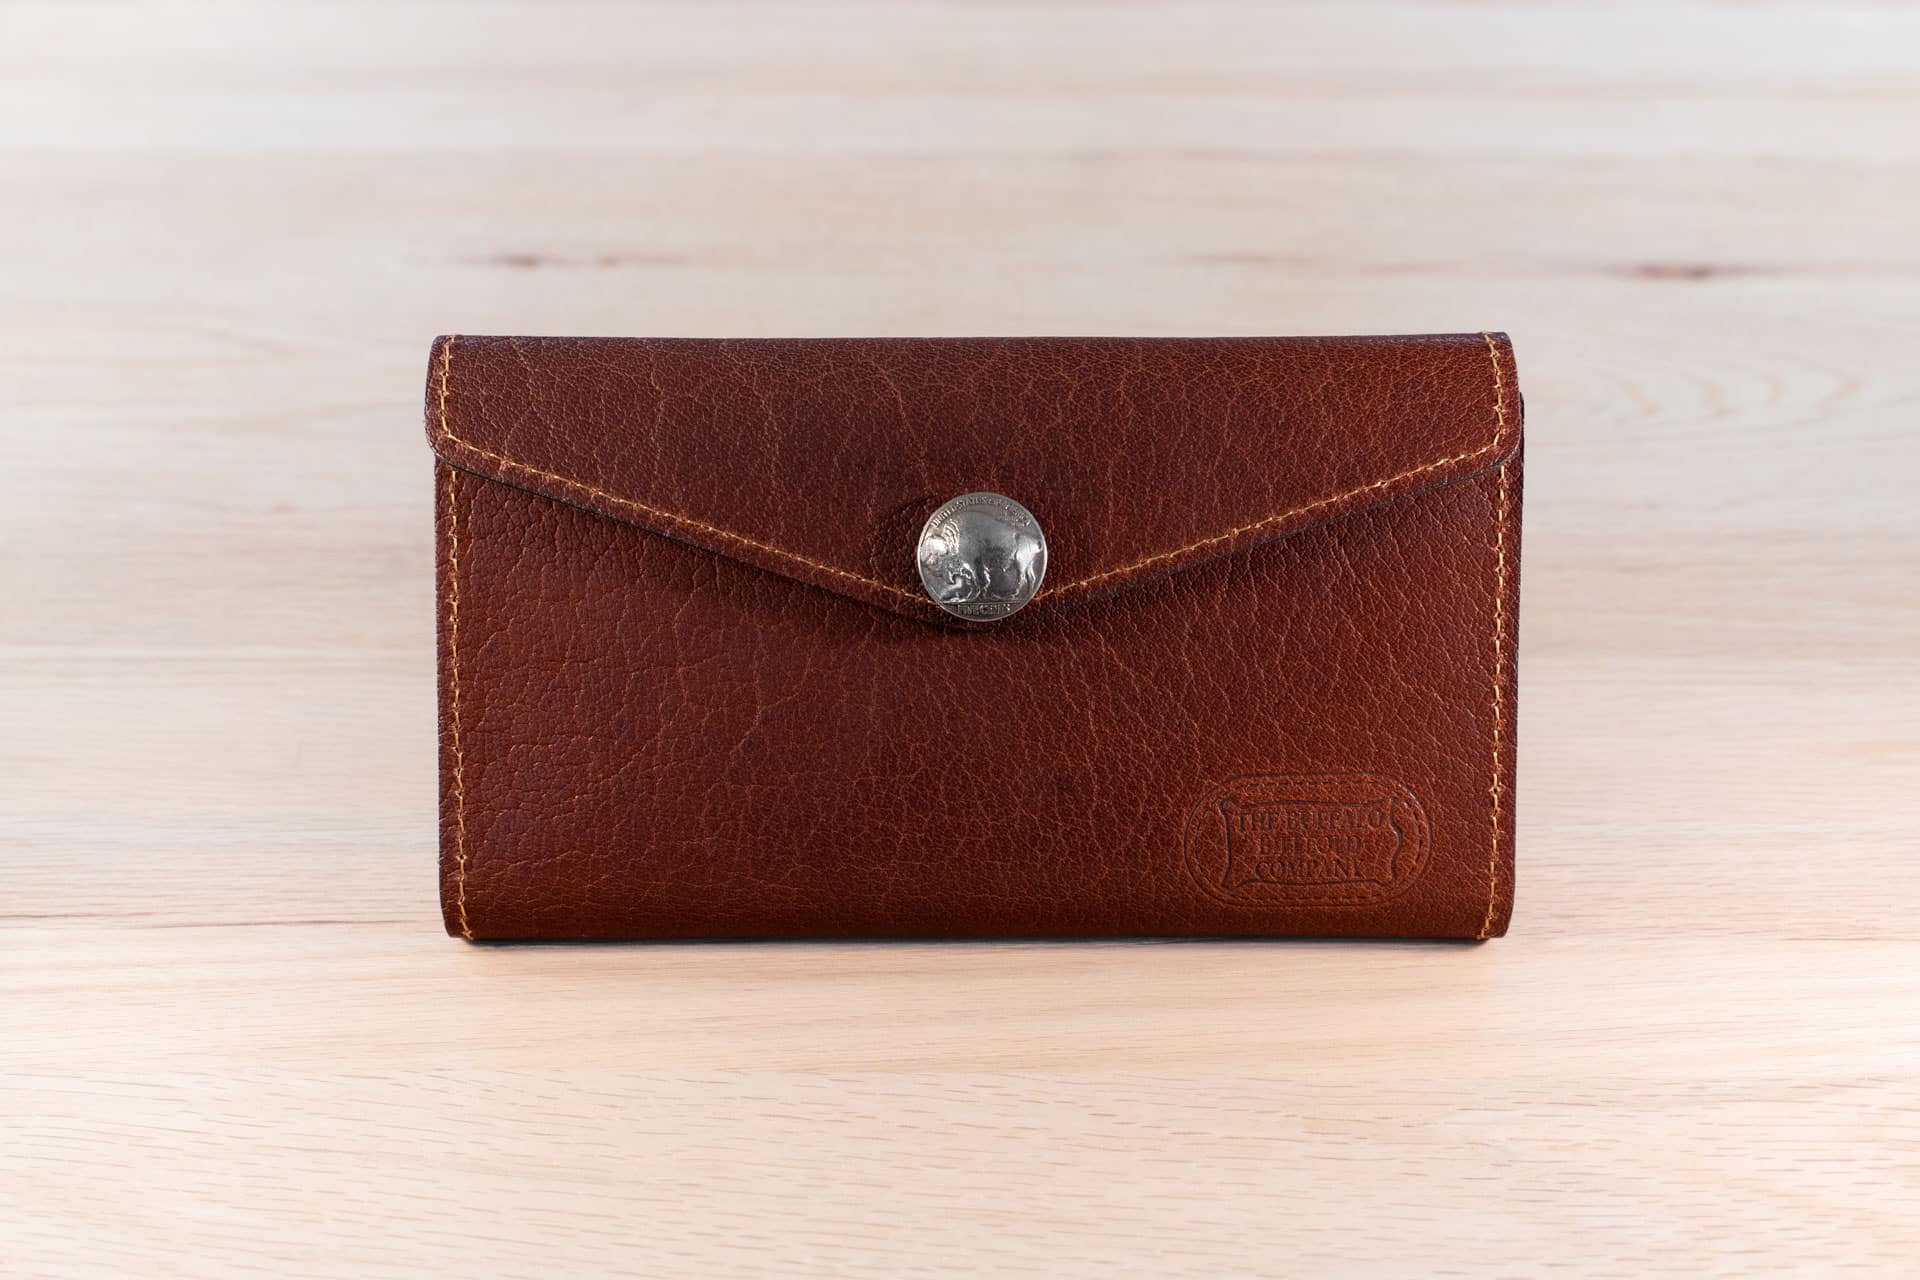 Nothing to see here, move along.: Wallet button snap repair and replacement